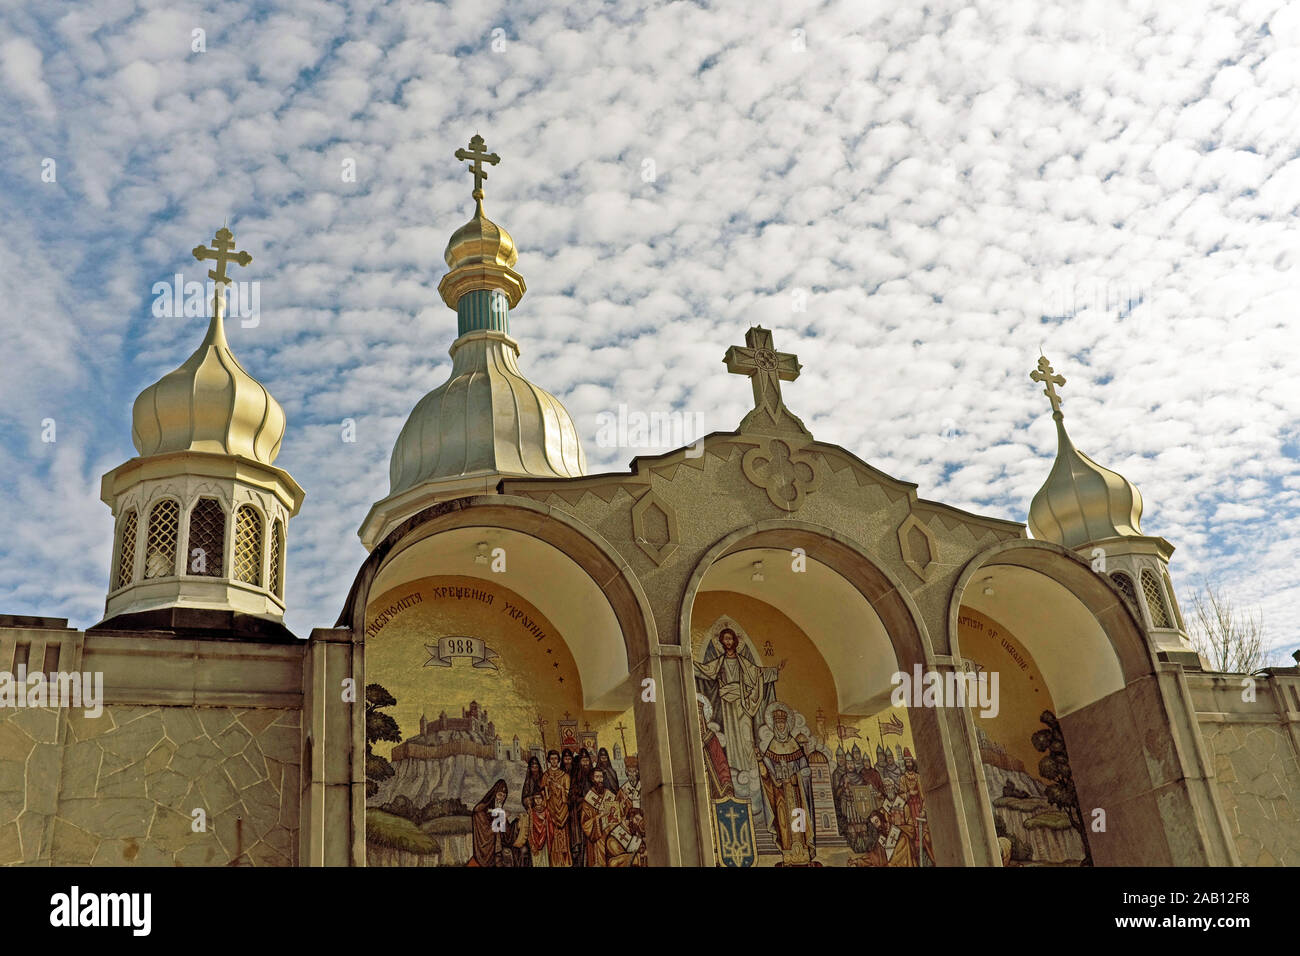 Golden domes of the St. Vladimir Ukrainian Orthodox Cathedral on State Road in Parma, Ohio, a suburb of Cleveland, Ohio. Stock Photo